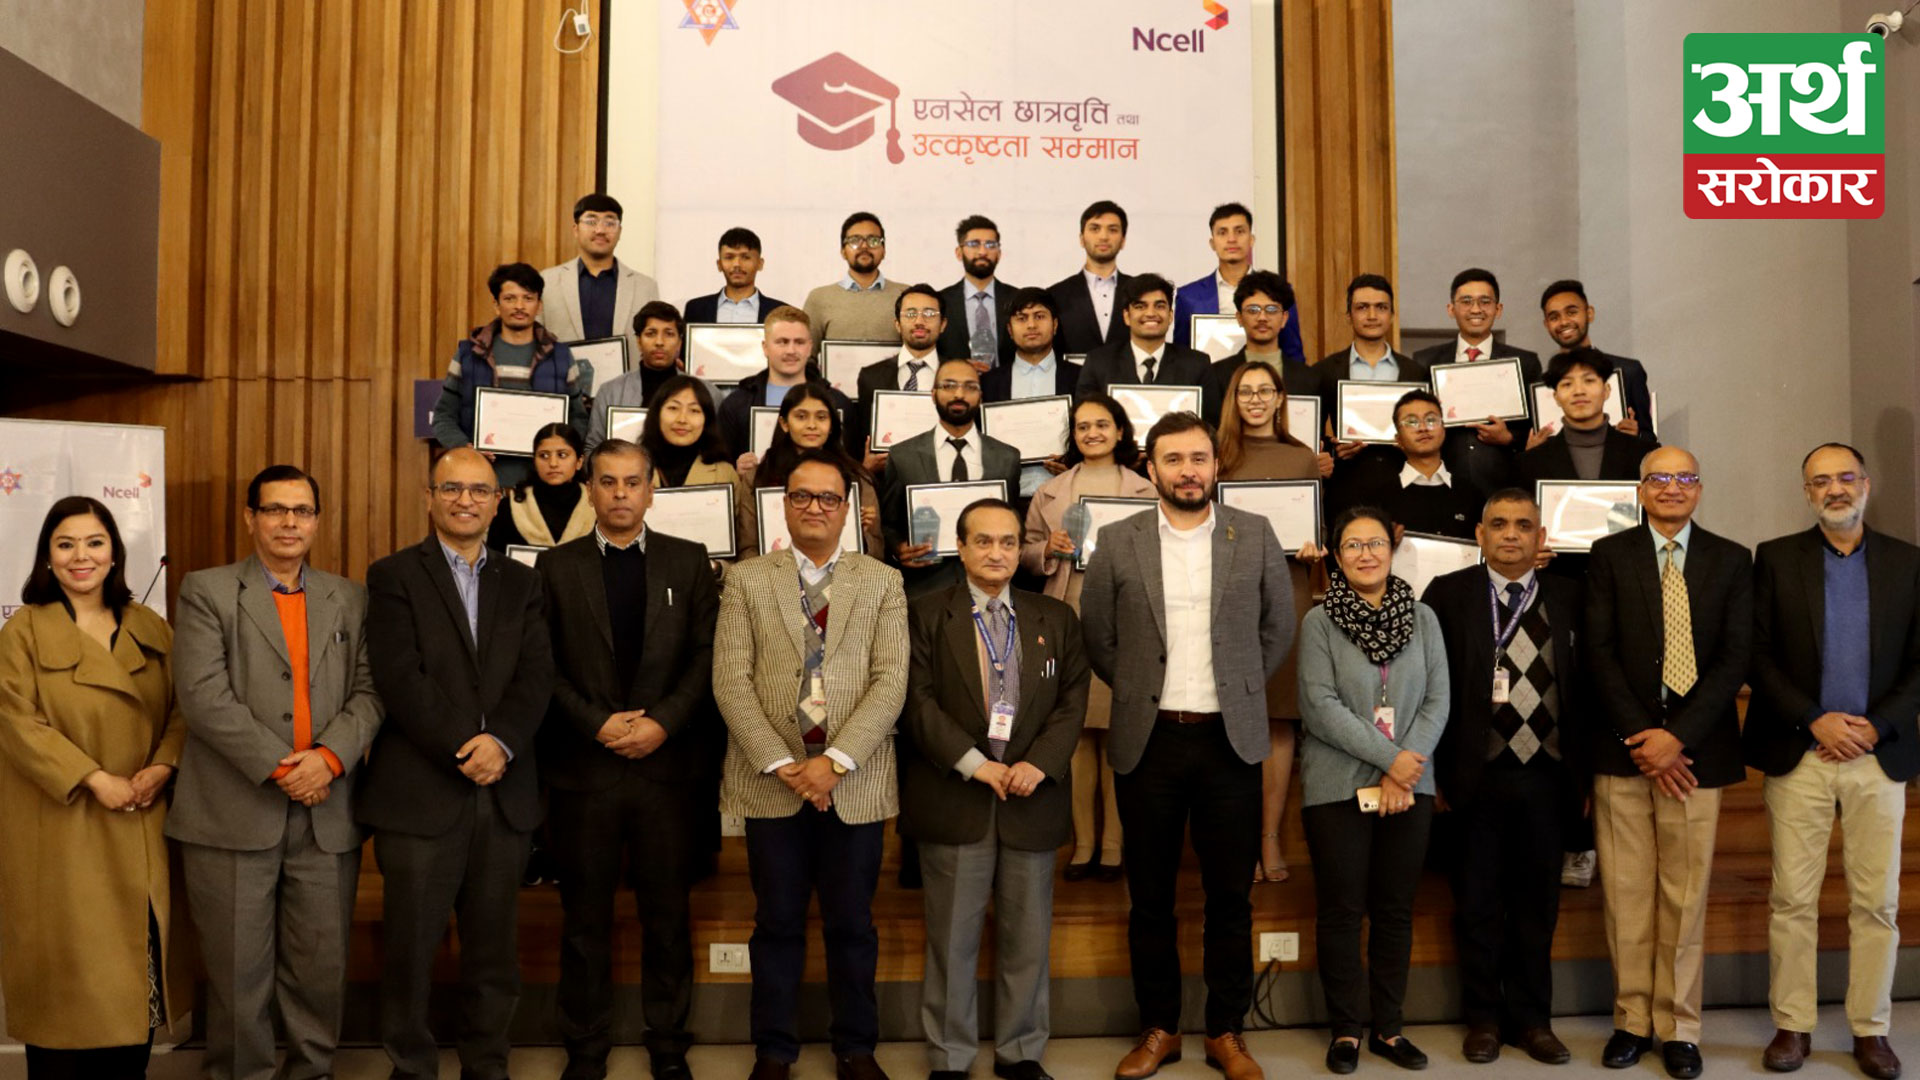 Ncell honor outstanding students at Pulchowk Campus for academic excellence